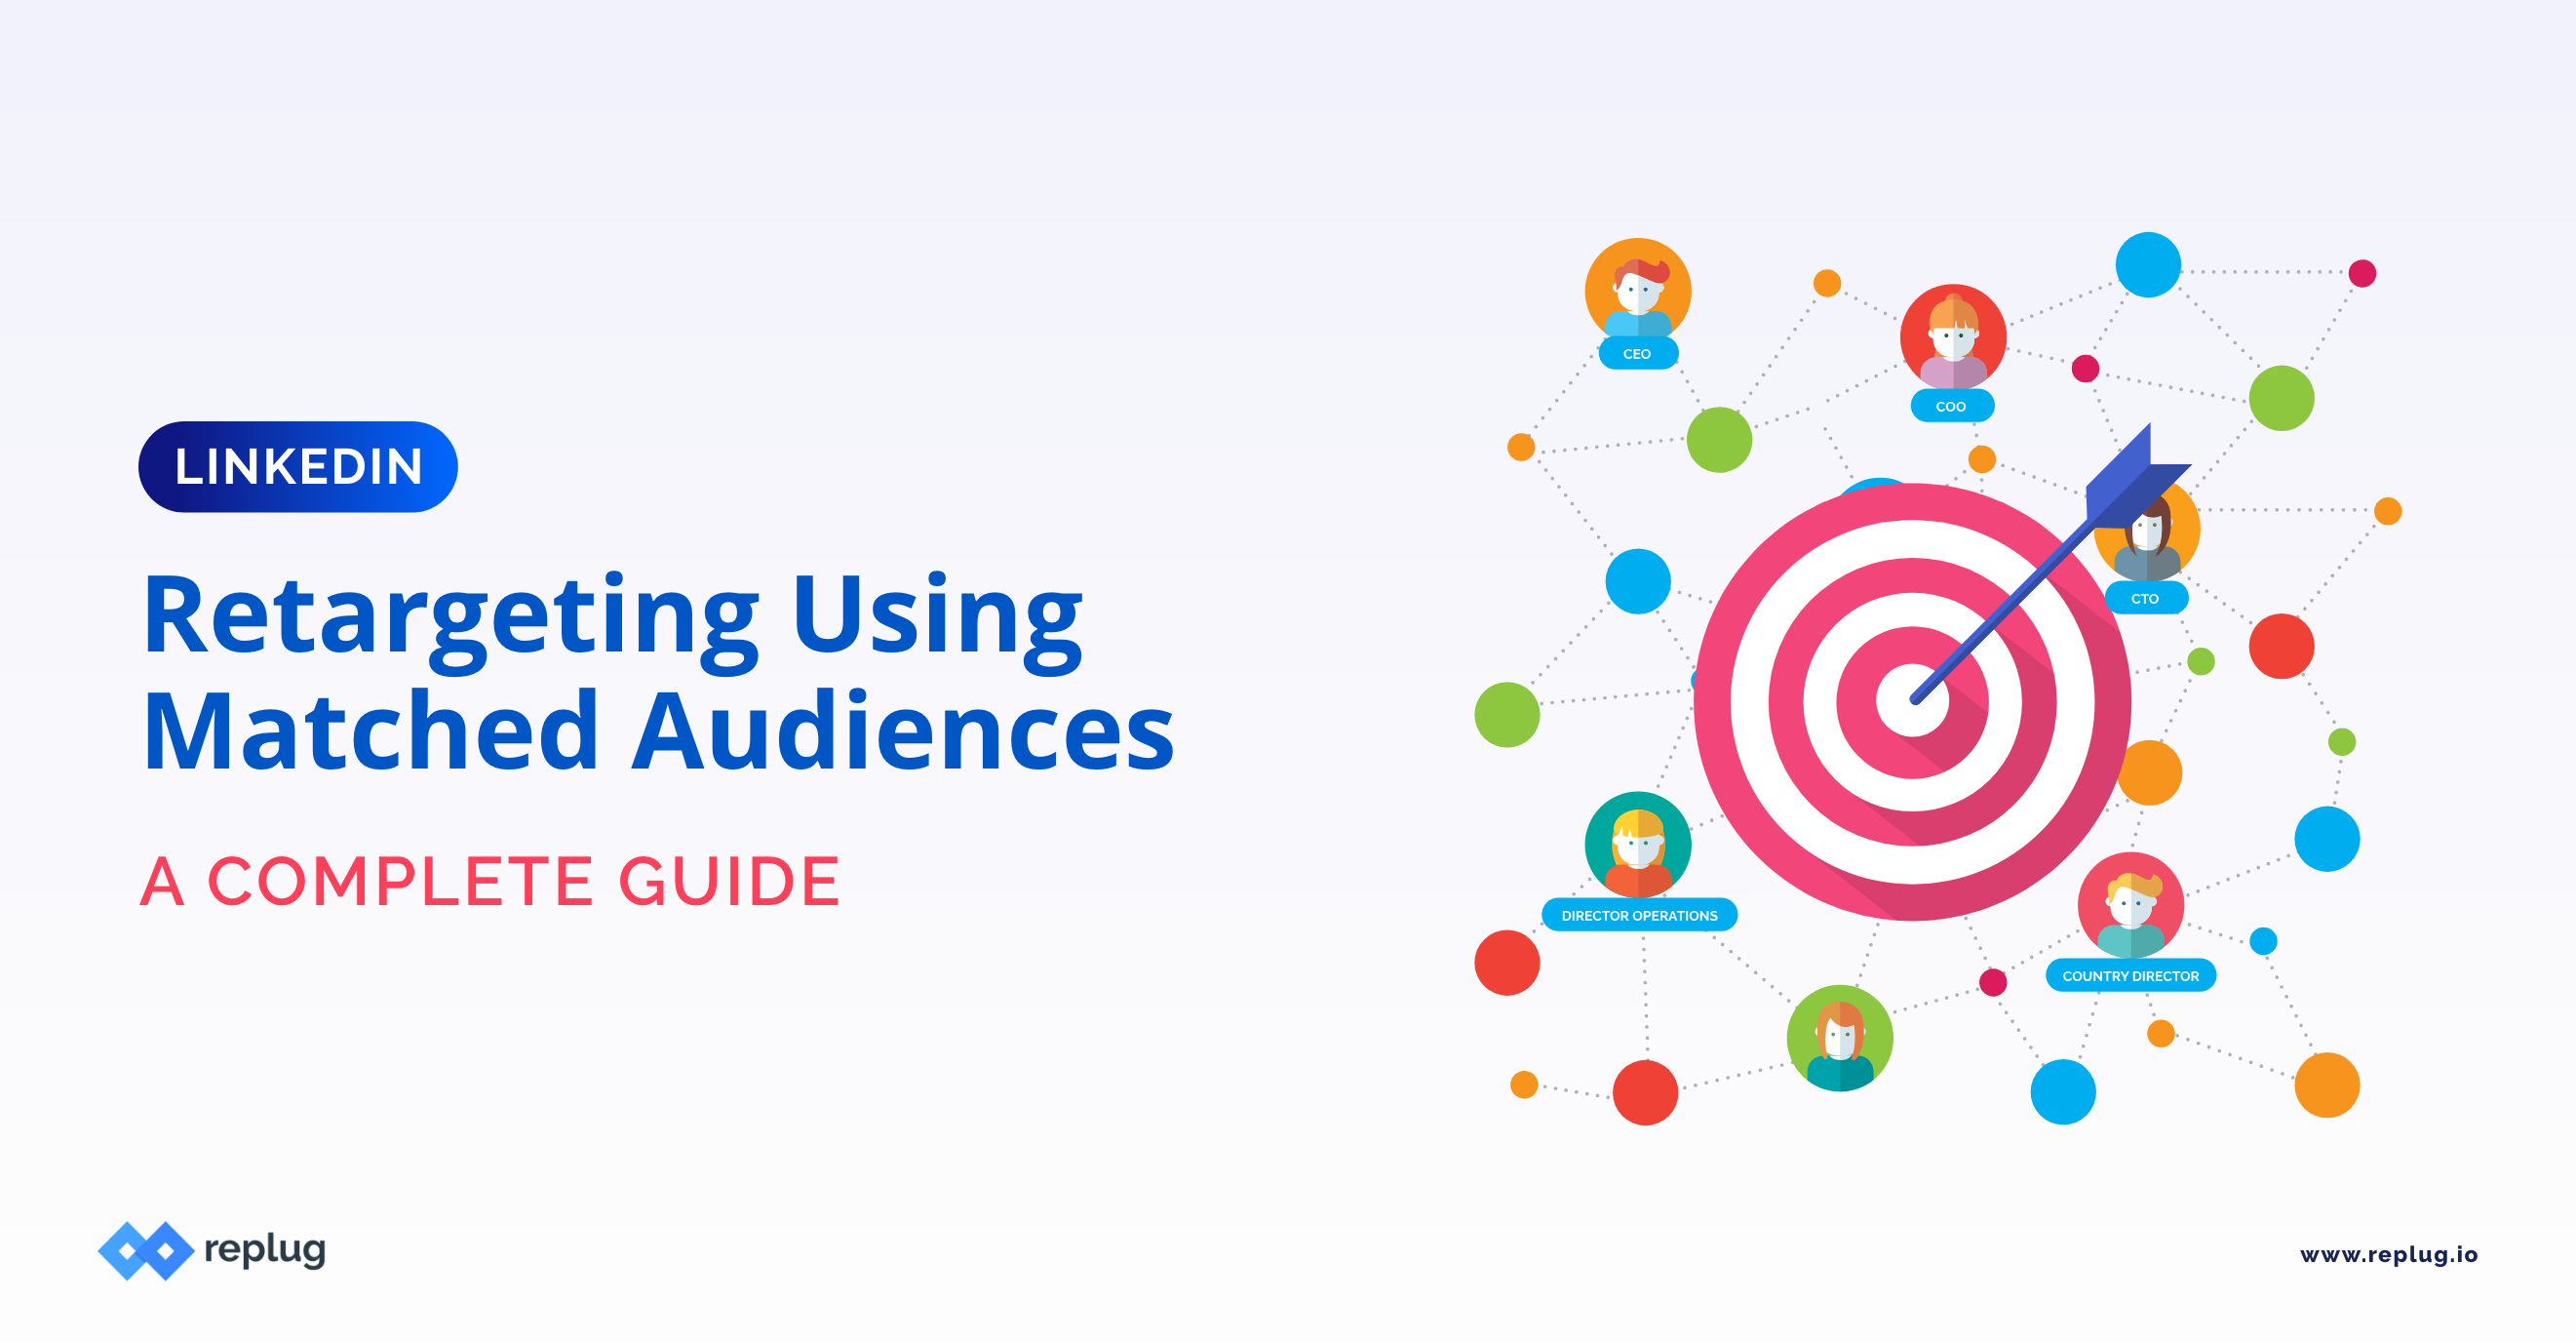 LinkedIn Retargeting using Matched Audiences – A complete Guide